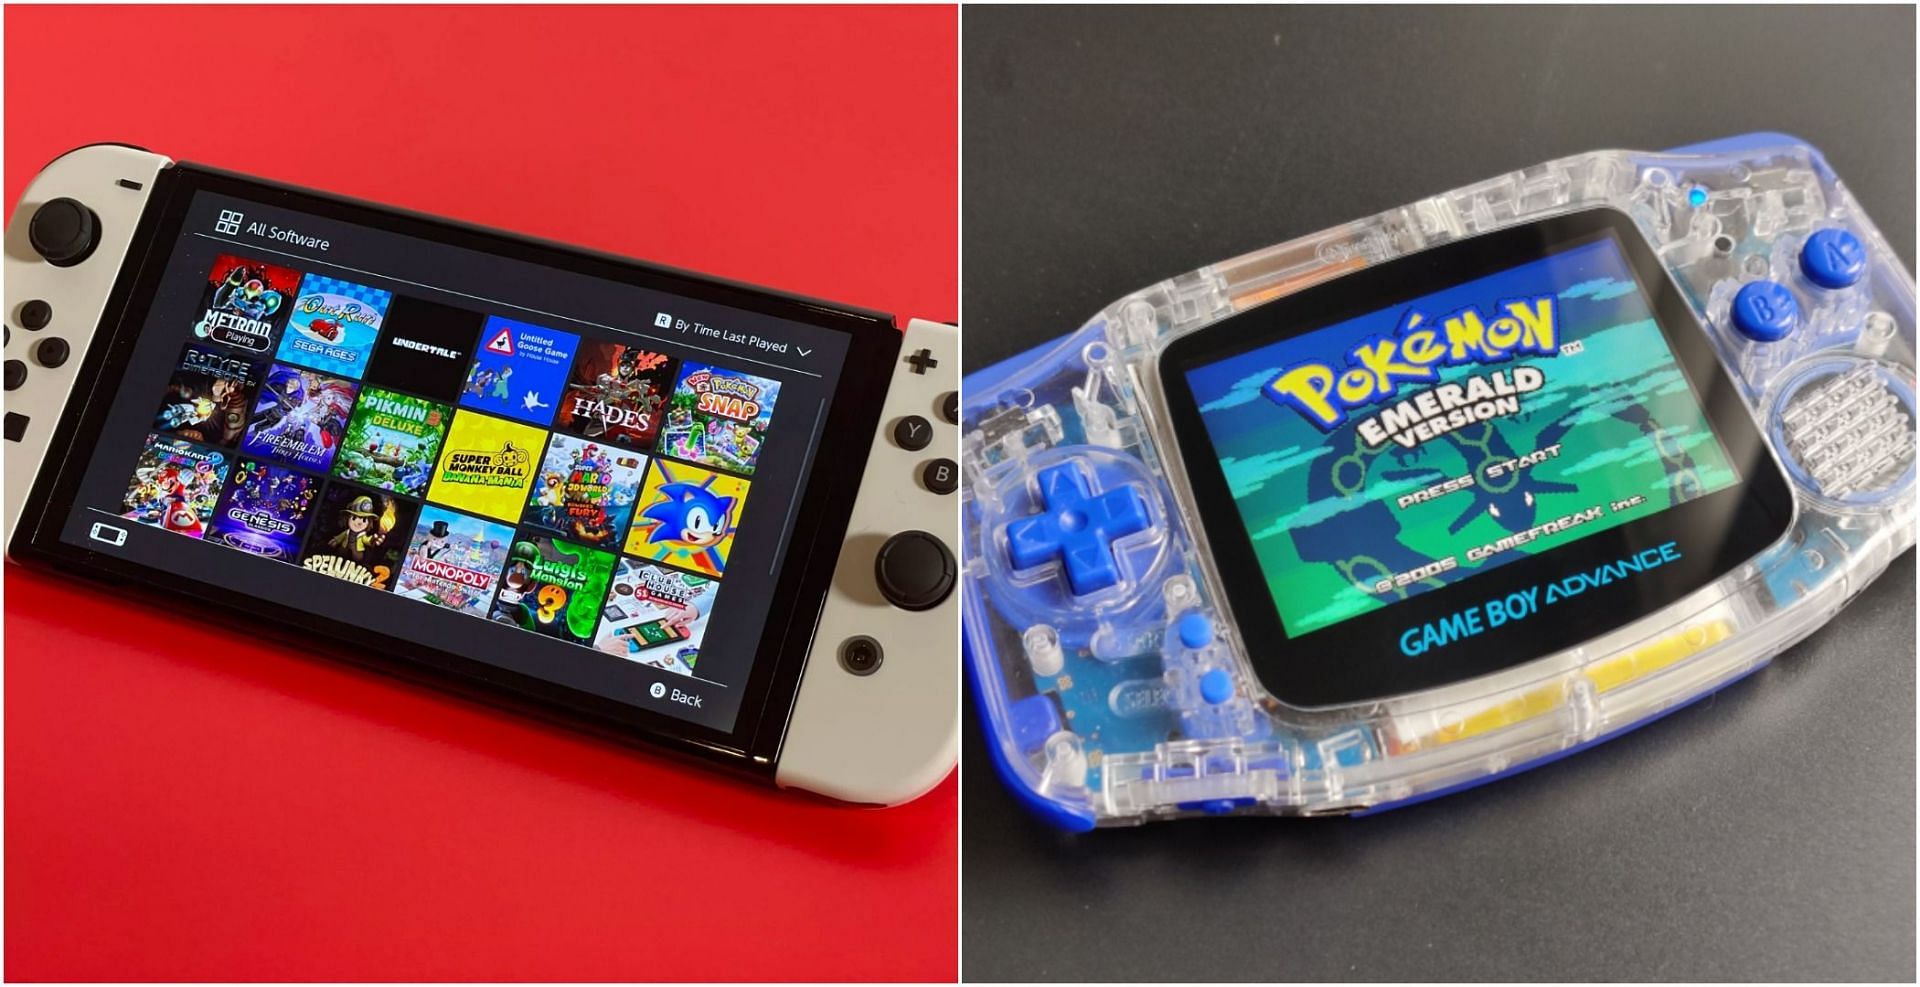 Nintendo Switch could soon get the ability to run GBA games on it (Images via Nintendo)